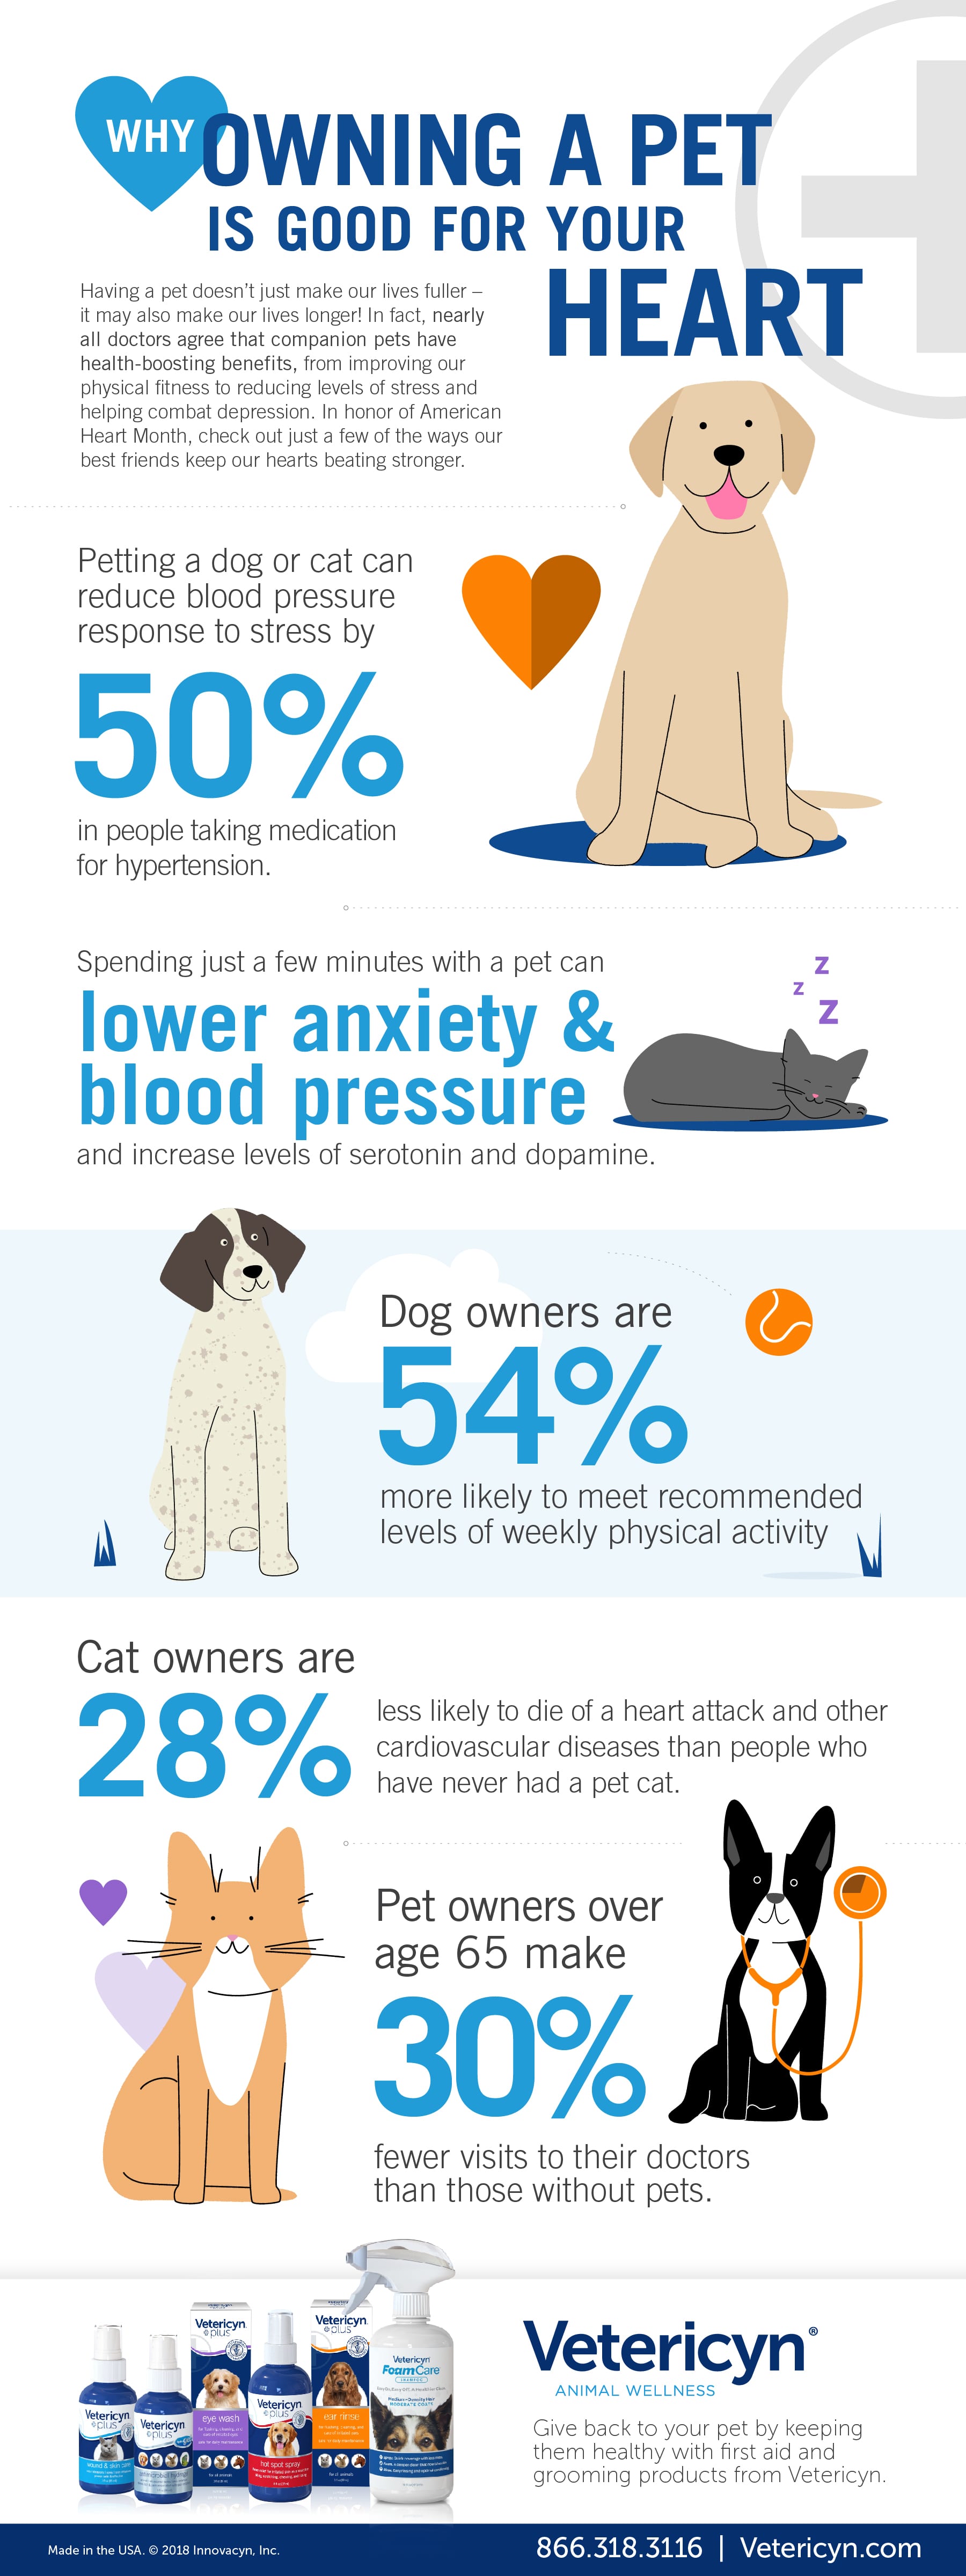 is owning a dog healthy